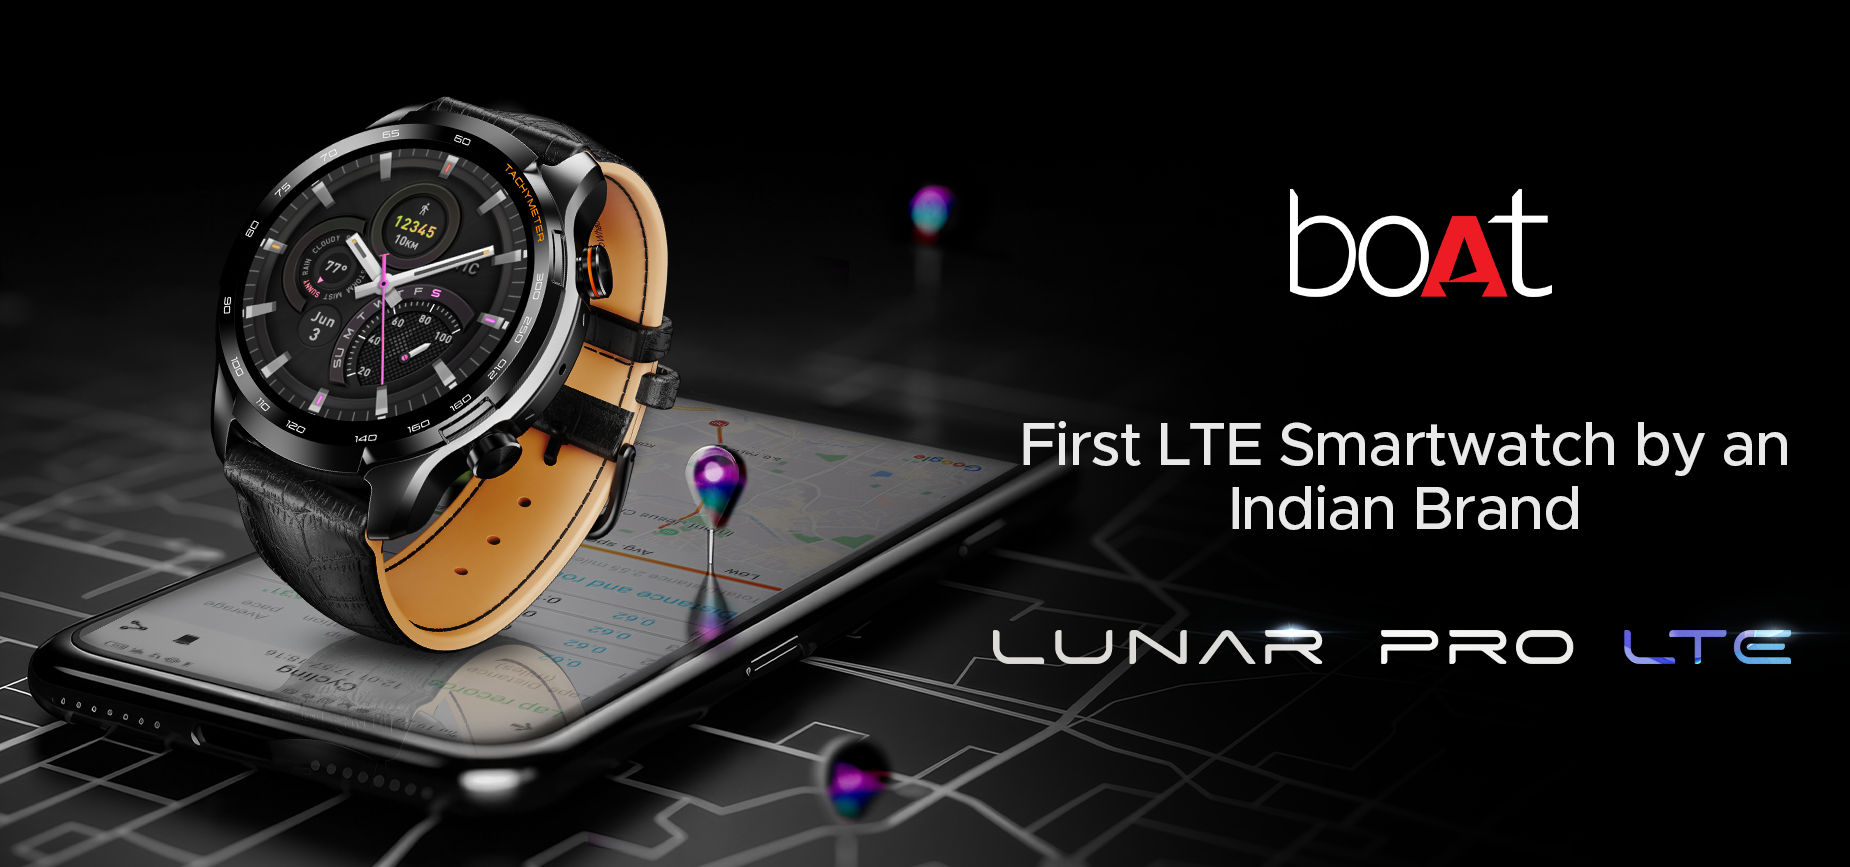 boAt Lunar Pro LTE with 1.39″ AMOLED display, GPS, eSIM support launched at  an introductory price of Rs. 9,999